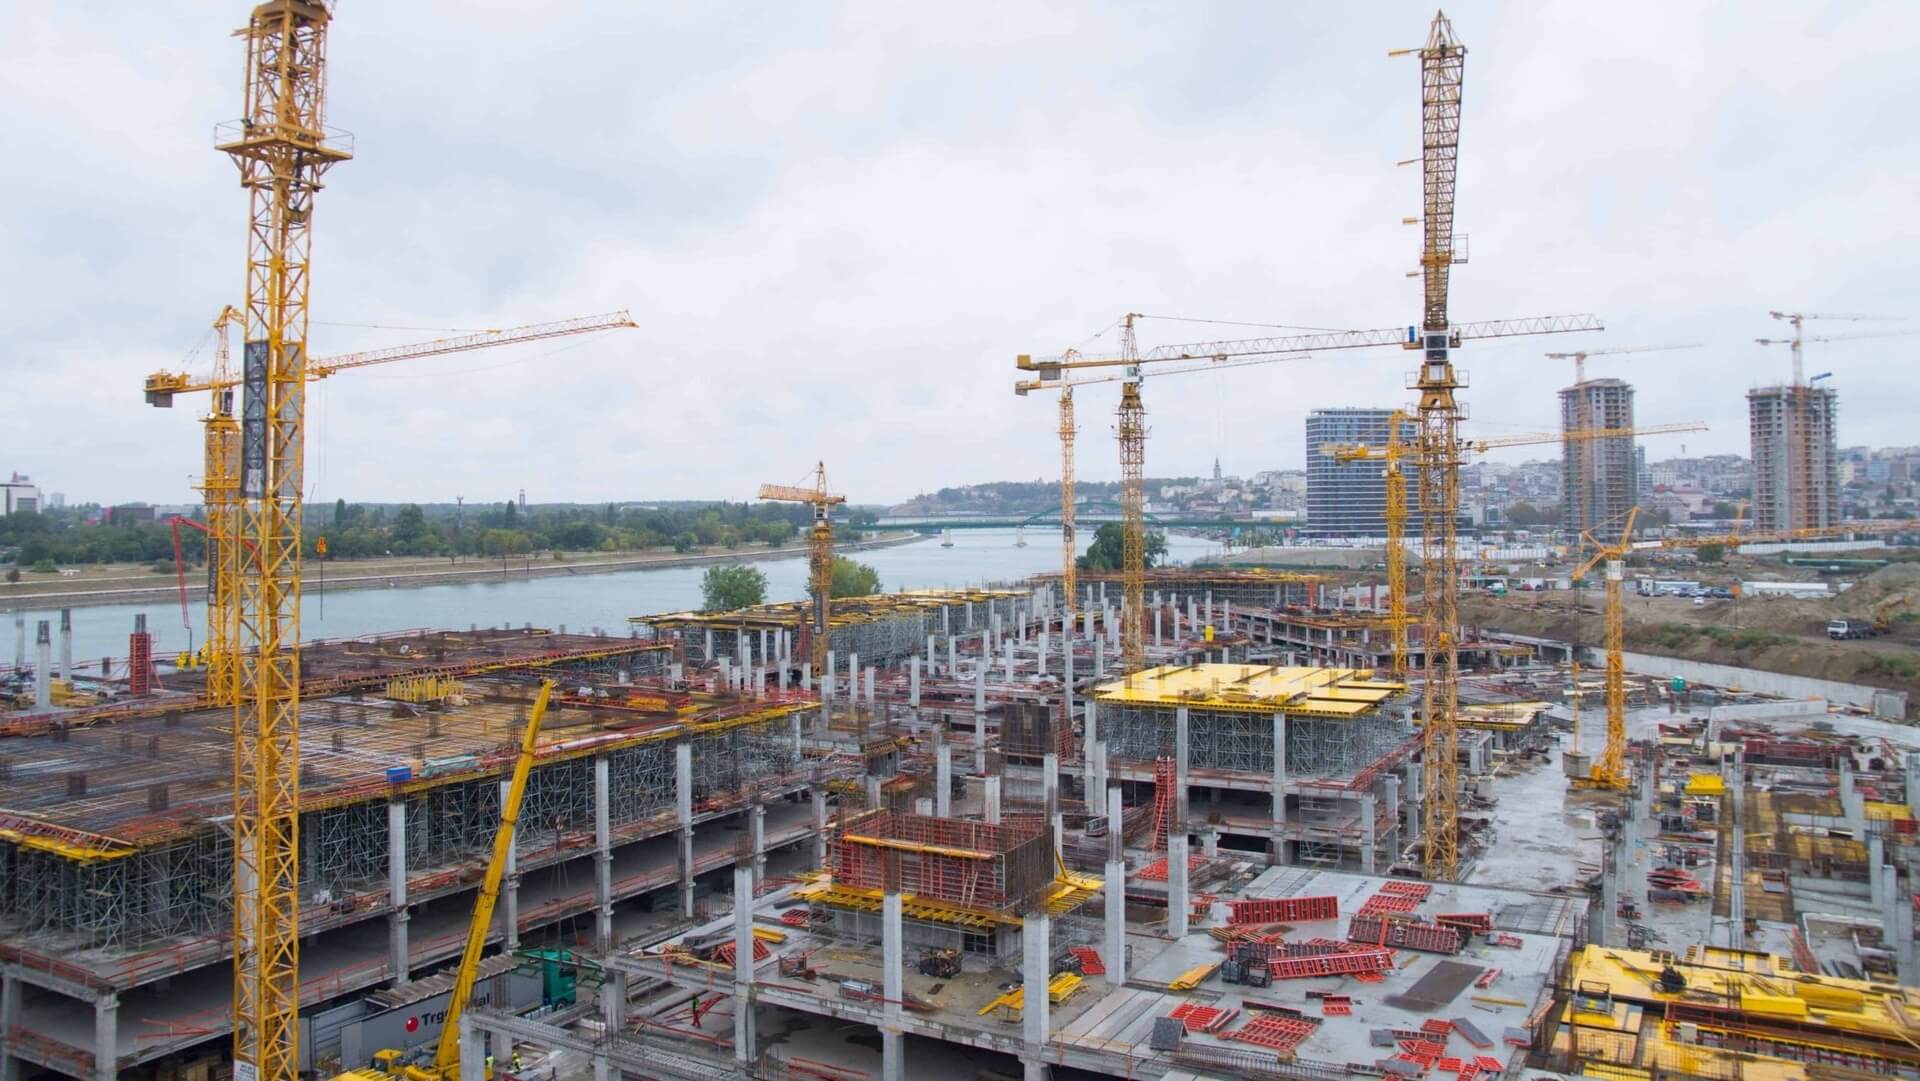 Belgrade Waterfront Appoints Gradina Company as Main Contractor for BW Galerija Shopping Mall